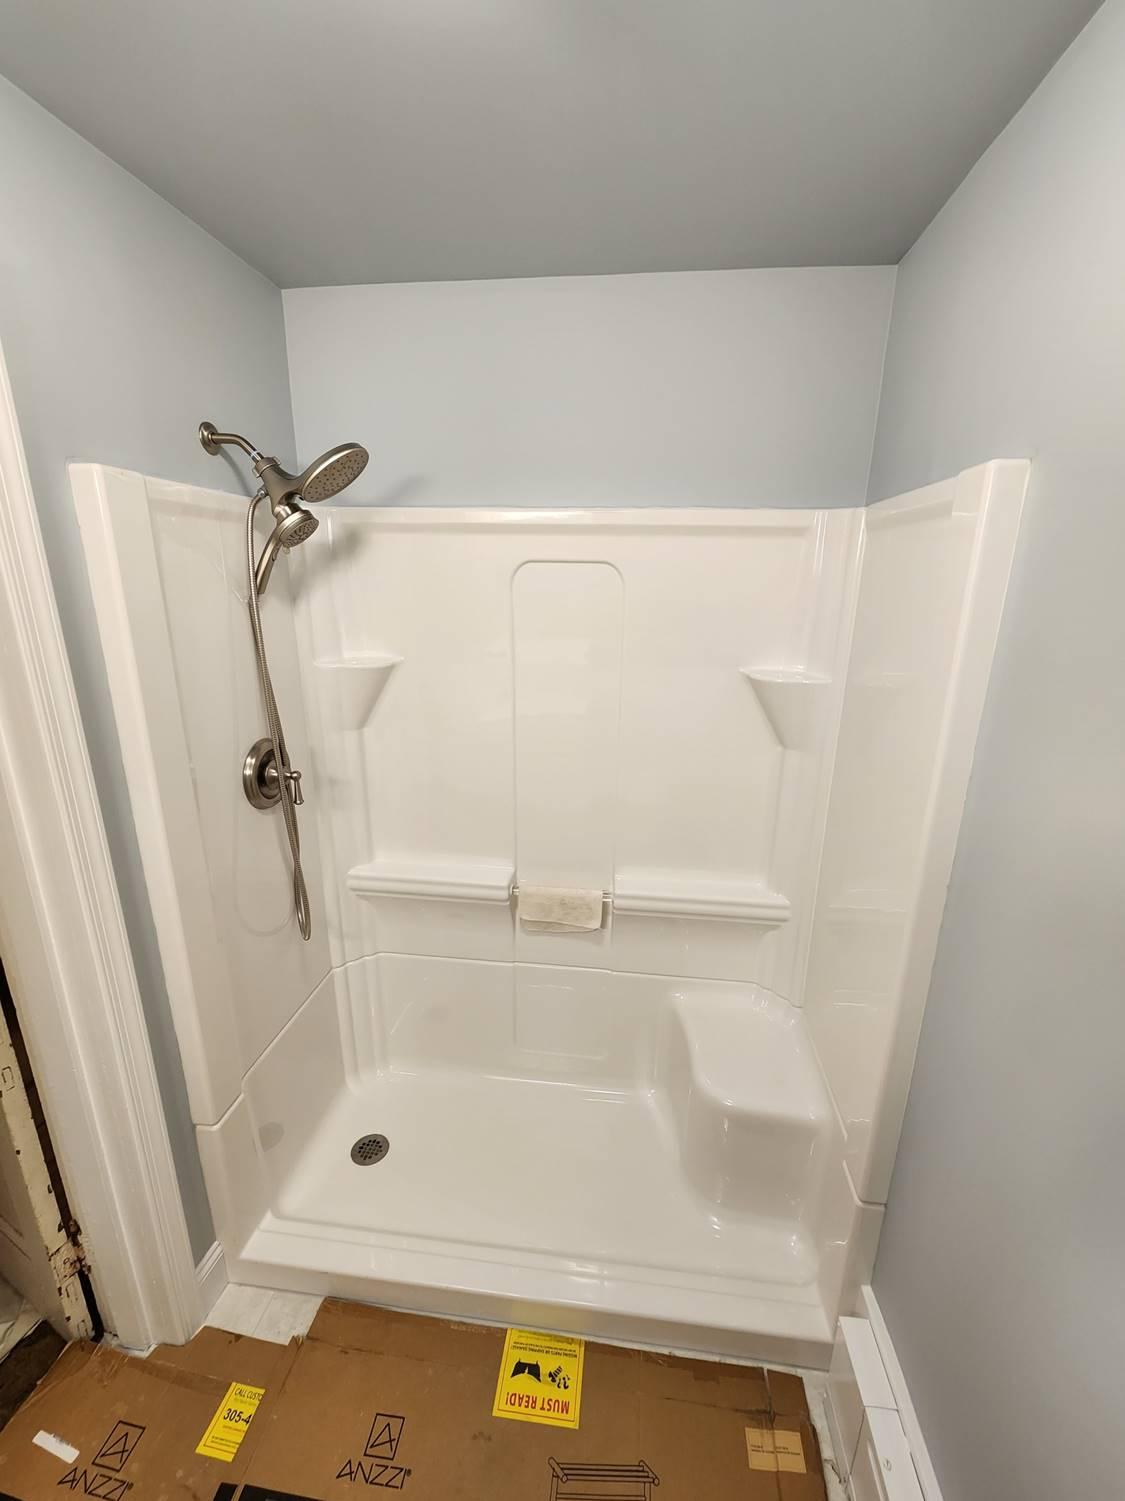 Brand new shower system with a dual showerhead installed by Applause Plumbing in Easton, PA. Revamp your bathroom with a luxurious walk-in shower installation and enjoy the ultimate relaxation experience at home.